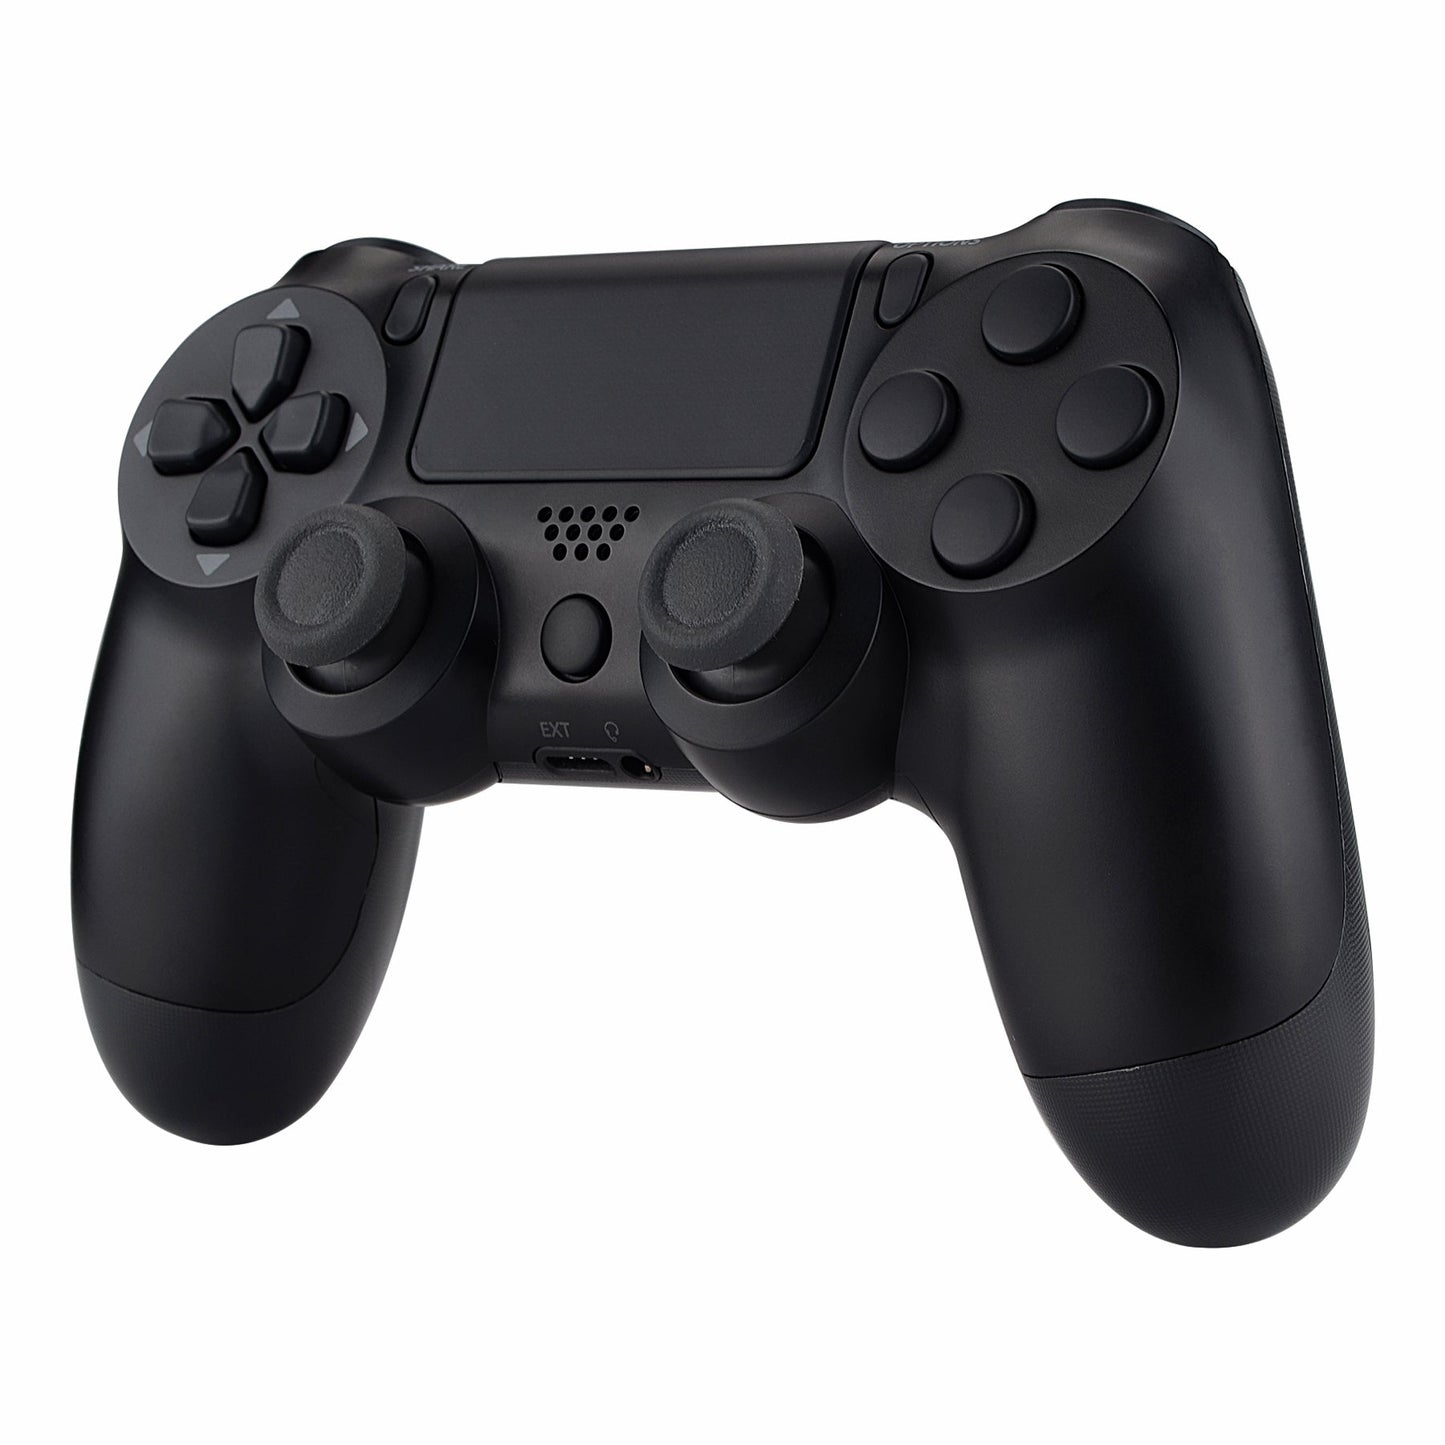 Ars calculates the size of the DualShock 4 touchpad: about 2.1” x 1”